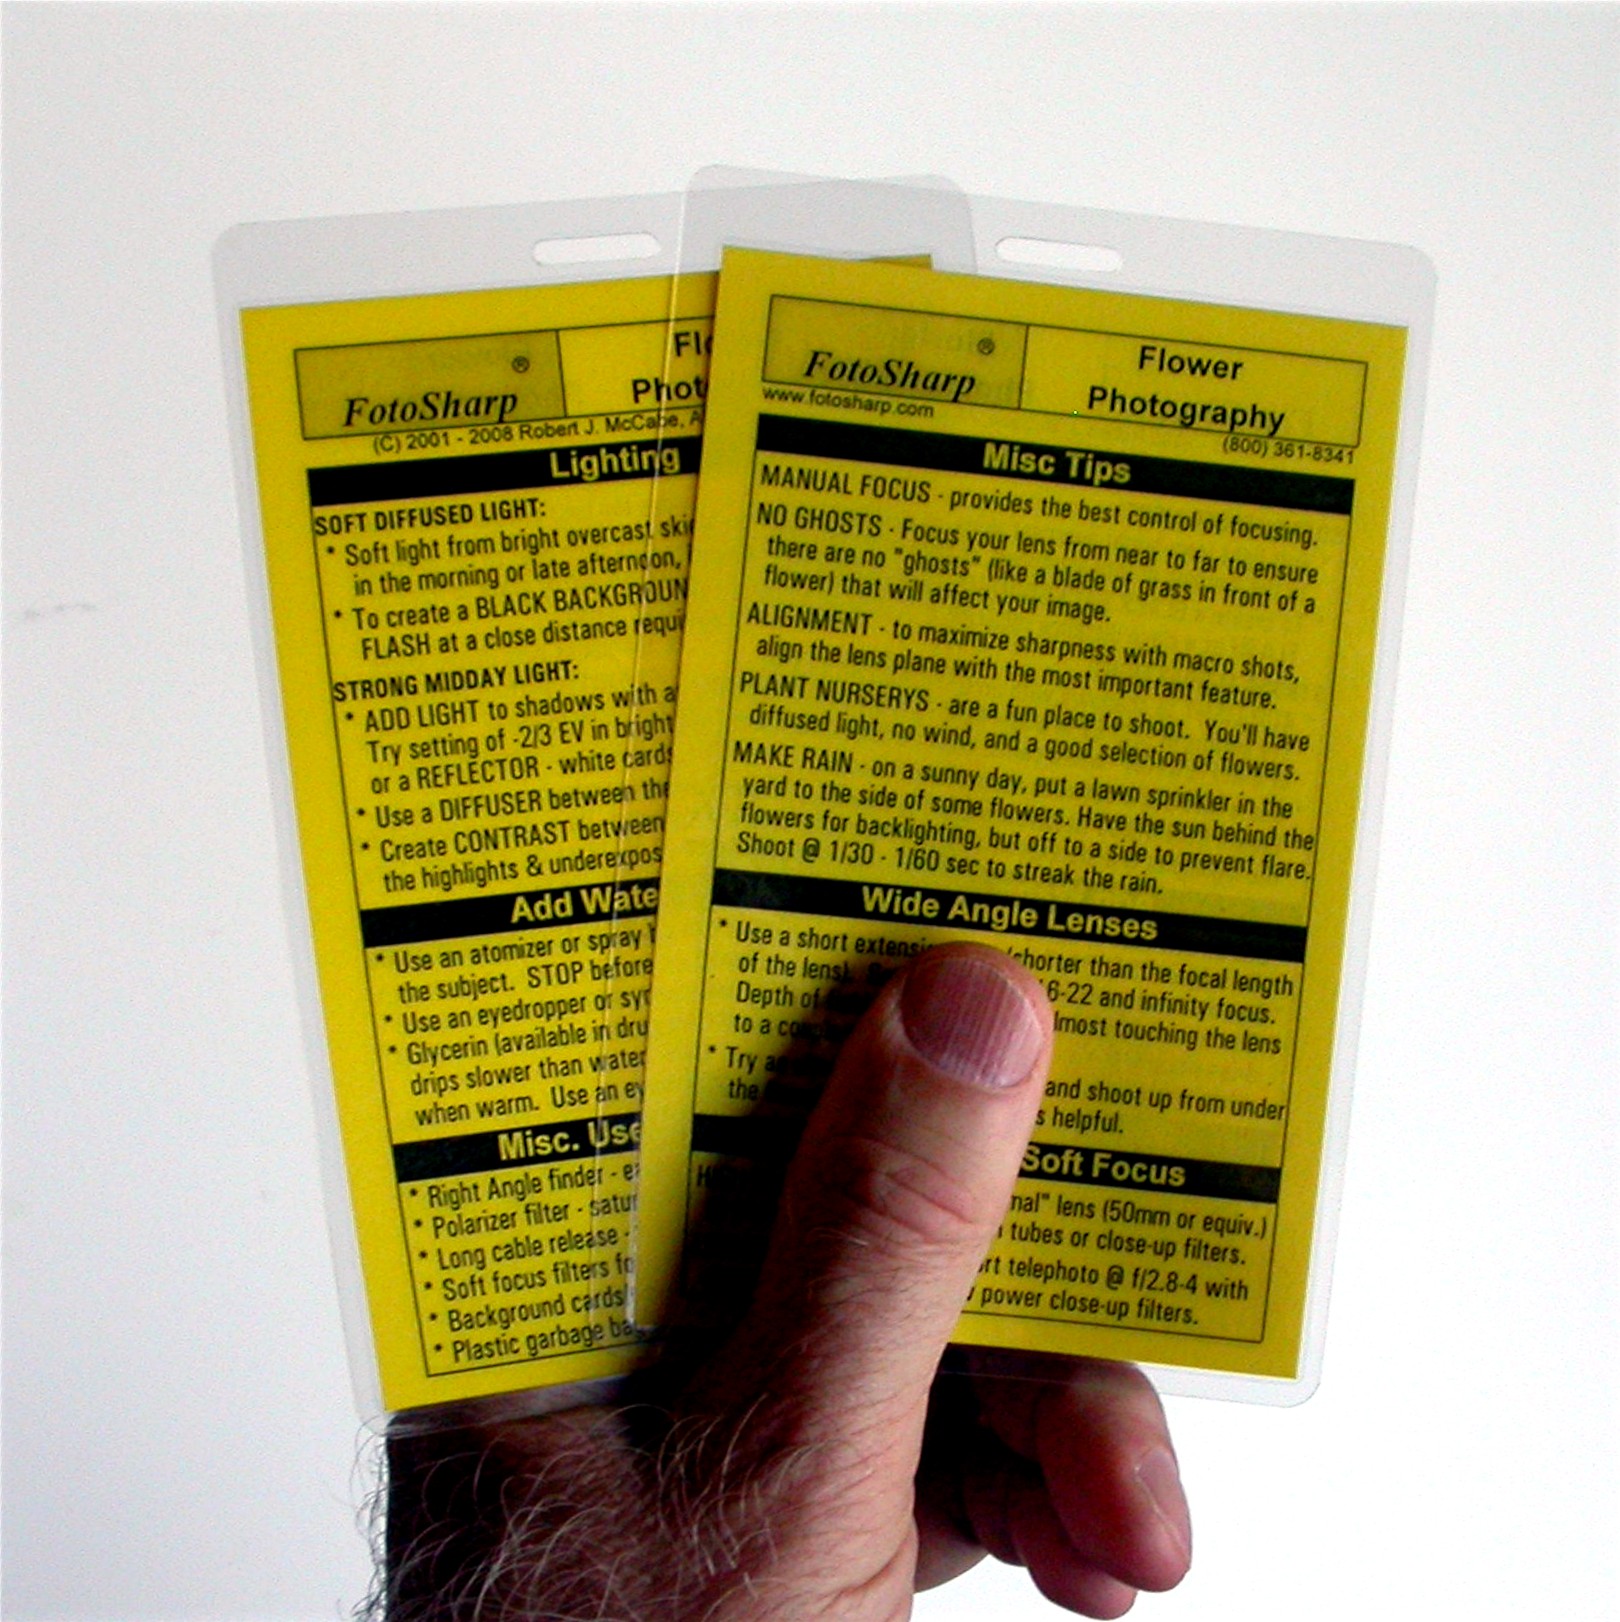 This is a low resolution image.
Our cards are printed on a
laser printer and are VERY
clear and easy to read.